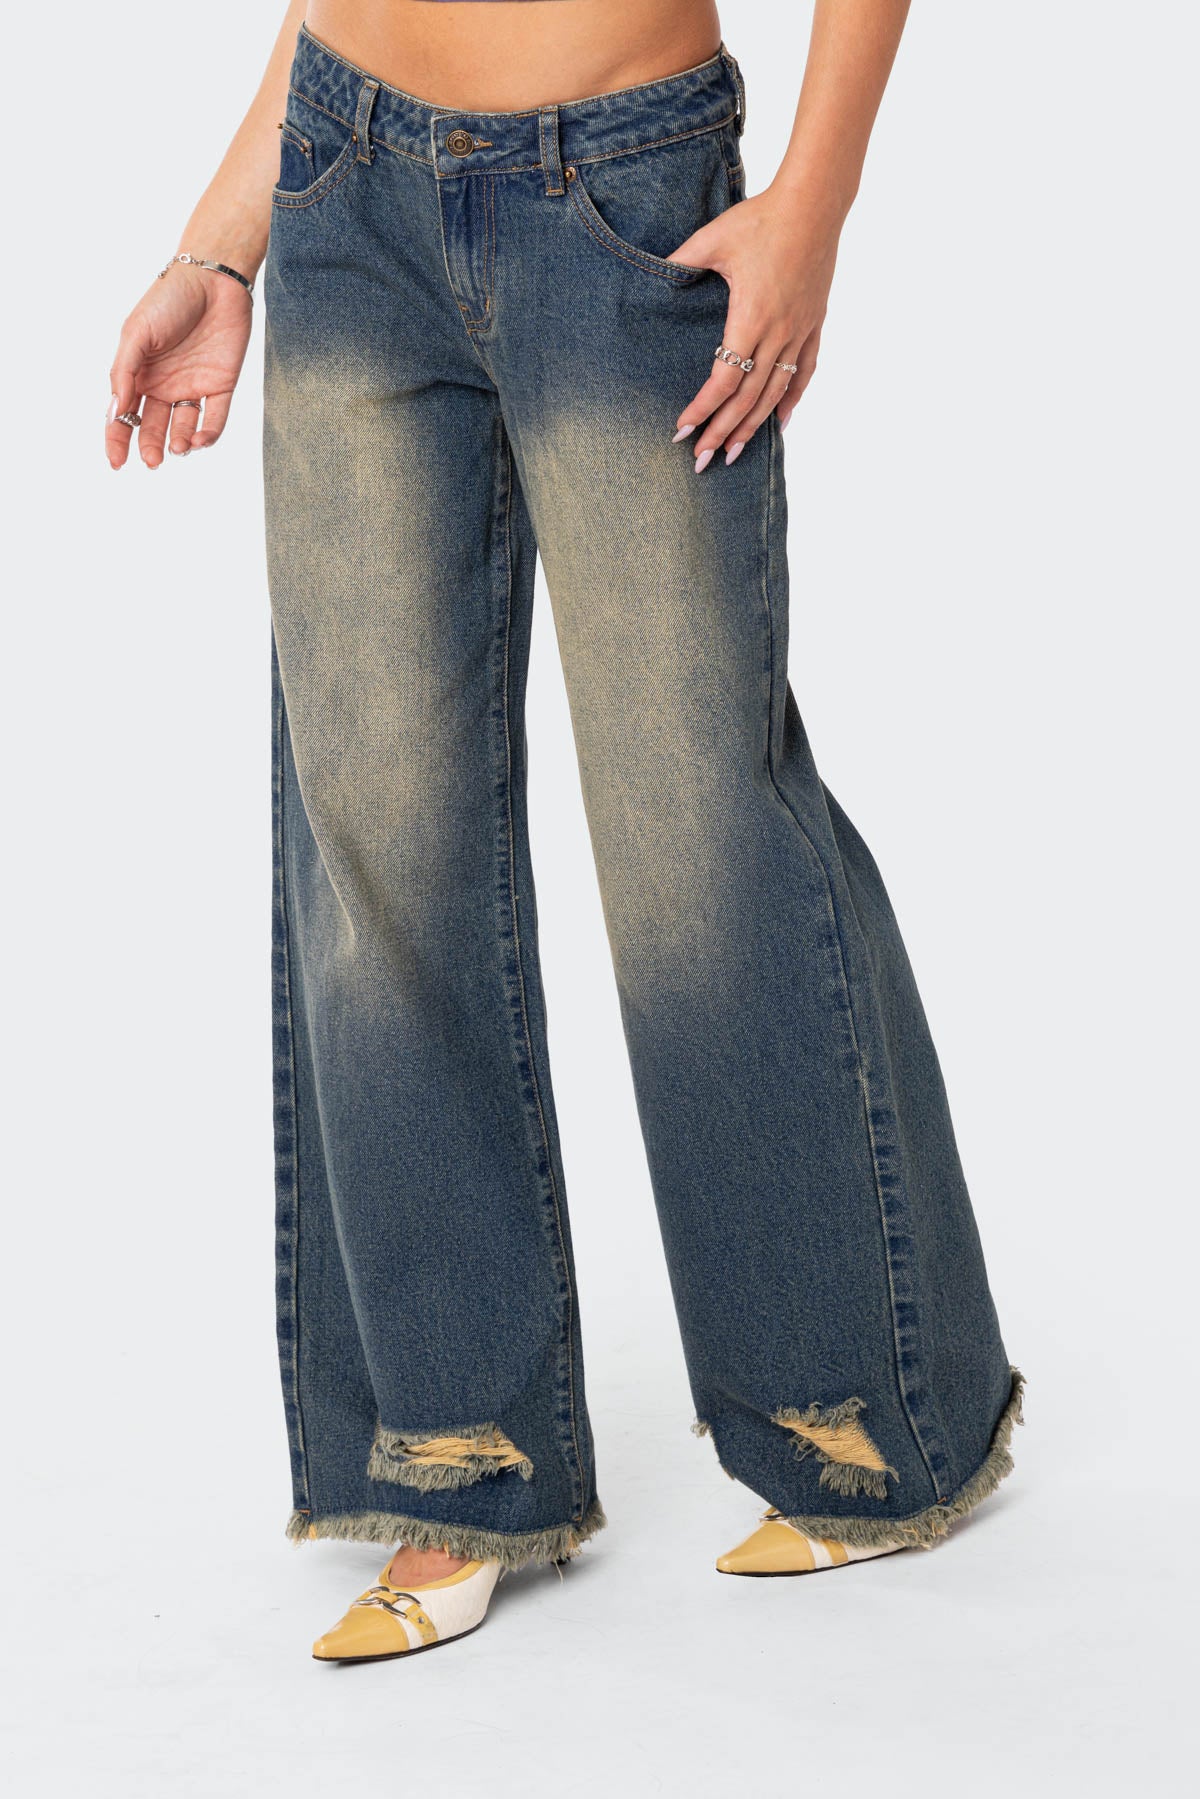 Orbit Washed Low Rise Jeans